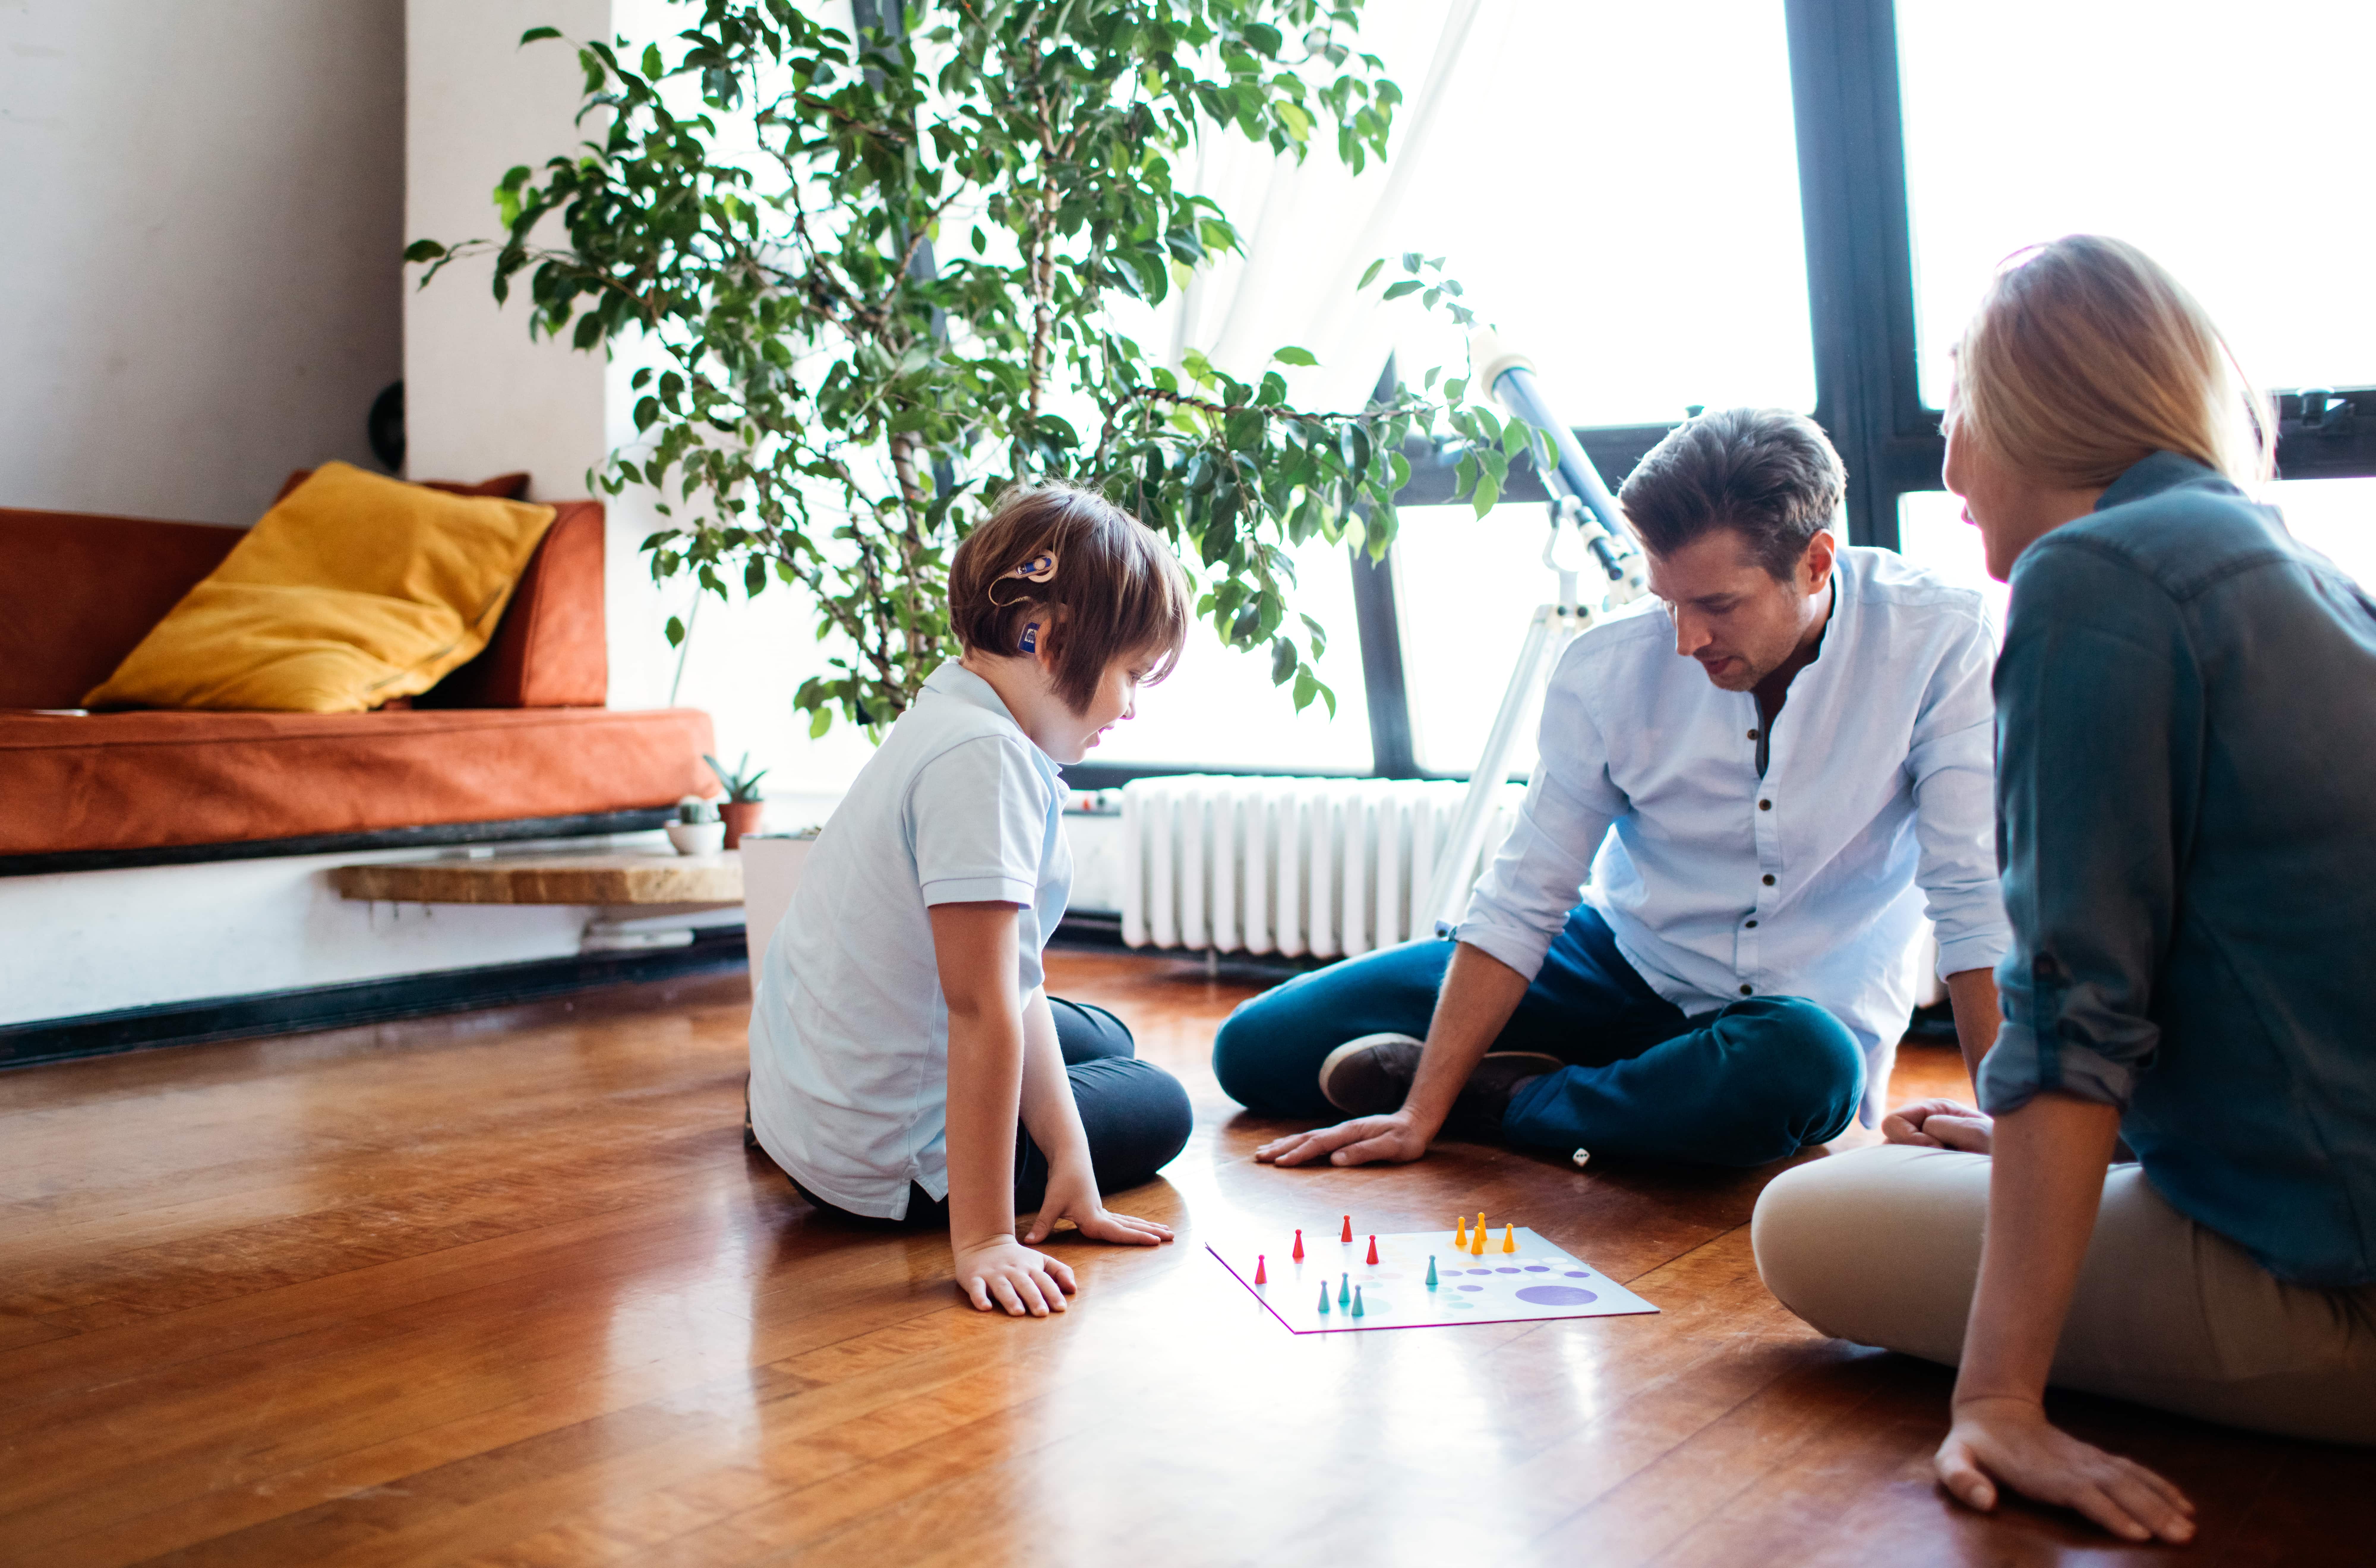 CSHA - Child with Cochlear Implant Interacting with Board Game